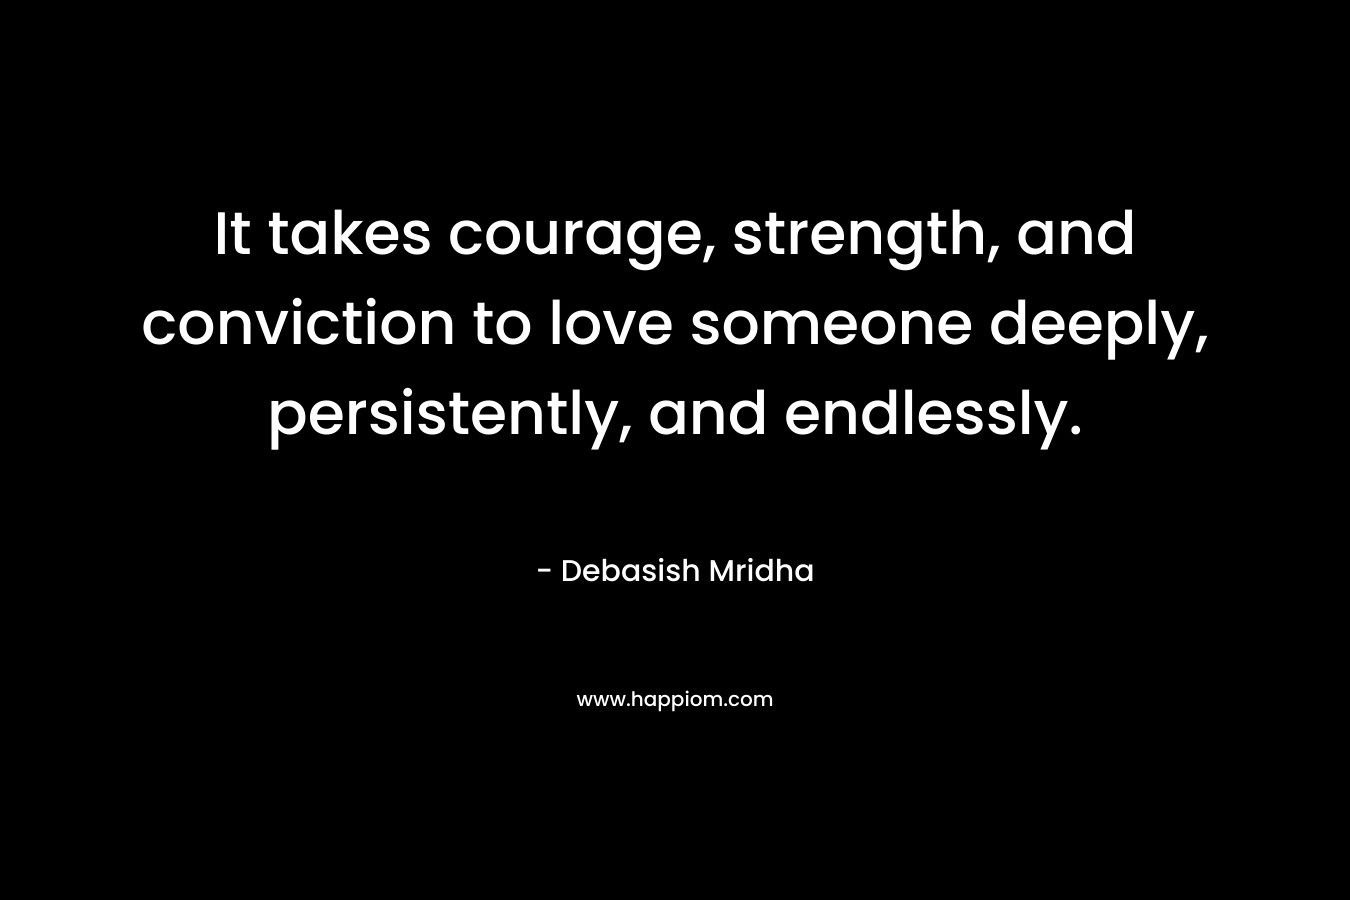 It takes courage, strength, and conviction to love someone deeply, persistently, and endlessly.